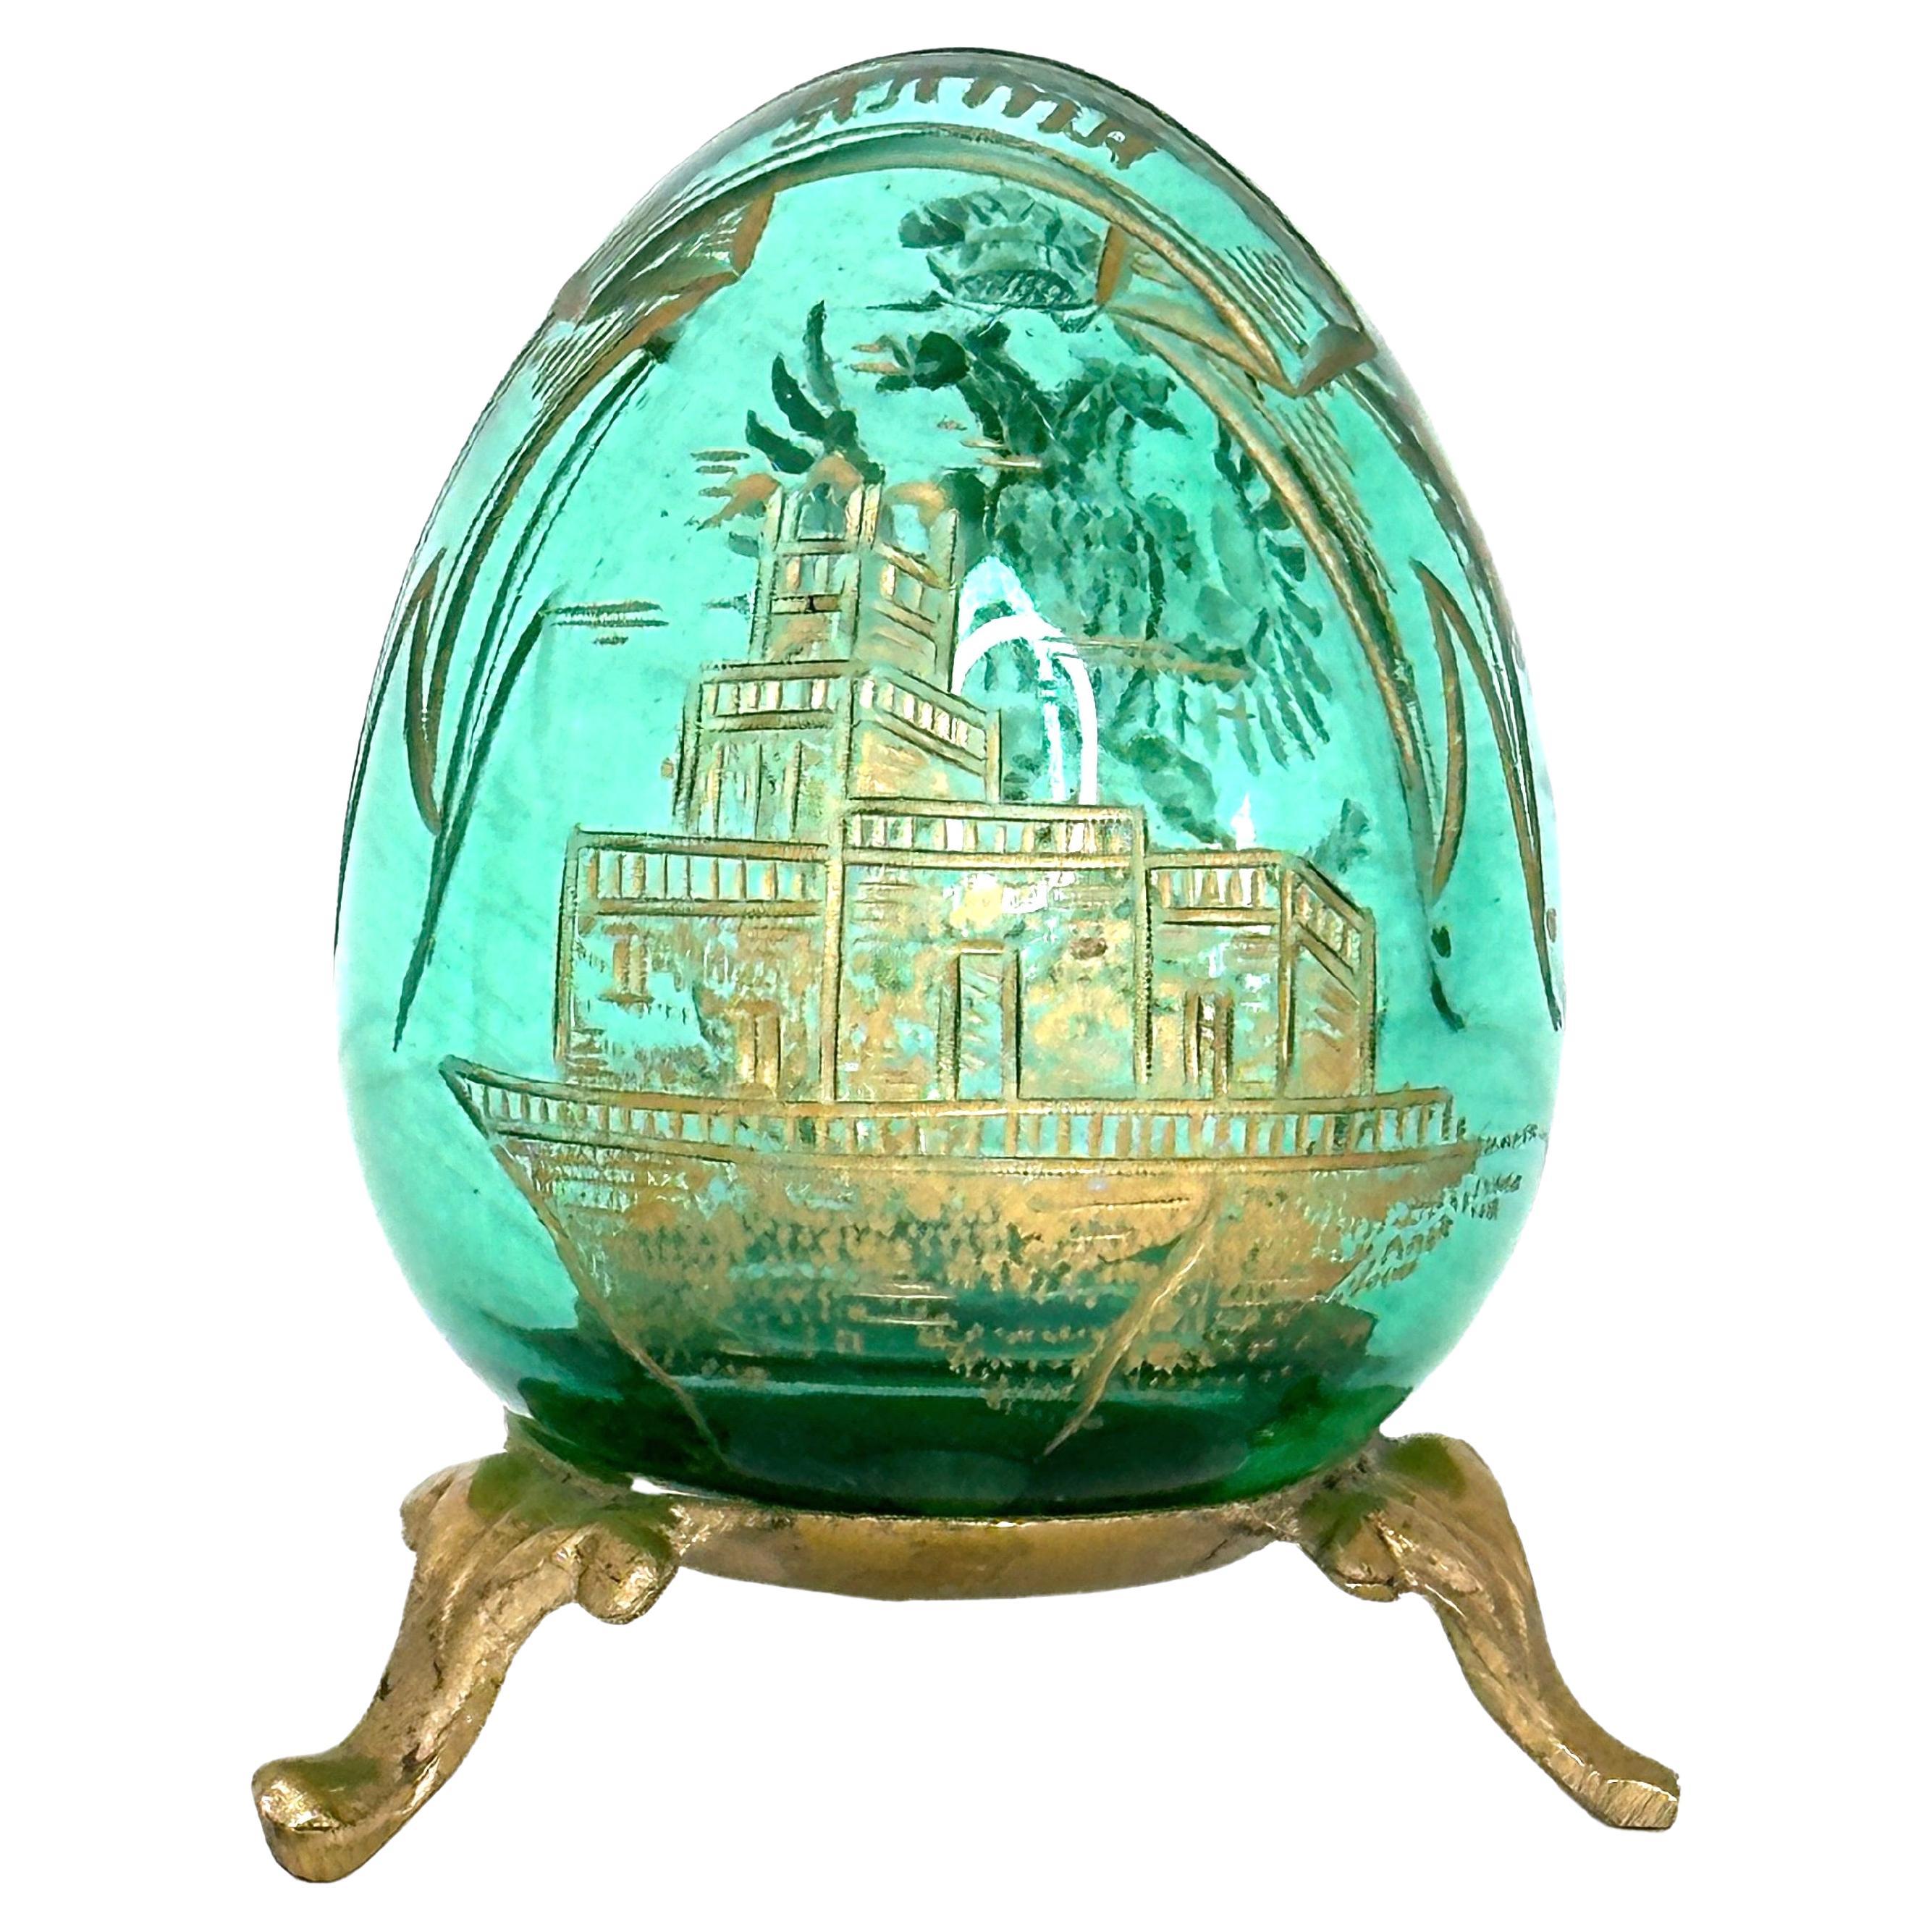 Vintage Faberge Russia Style Green Glass Egg with Etched Decorations